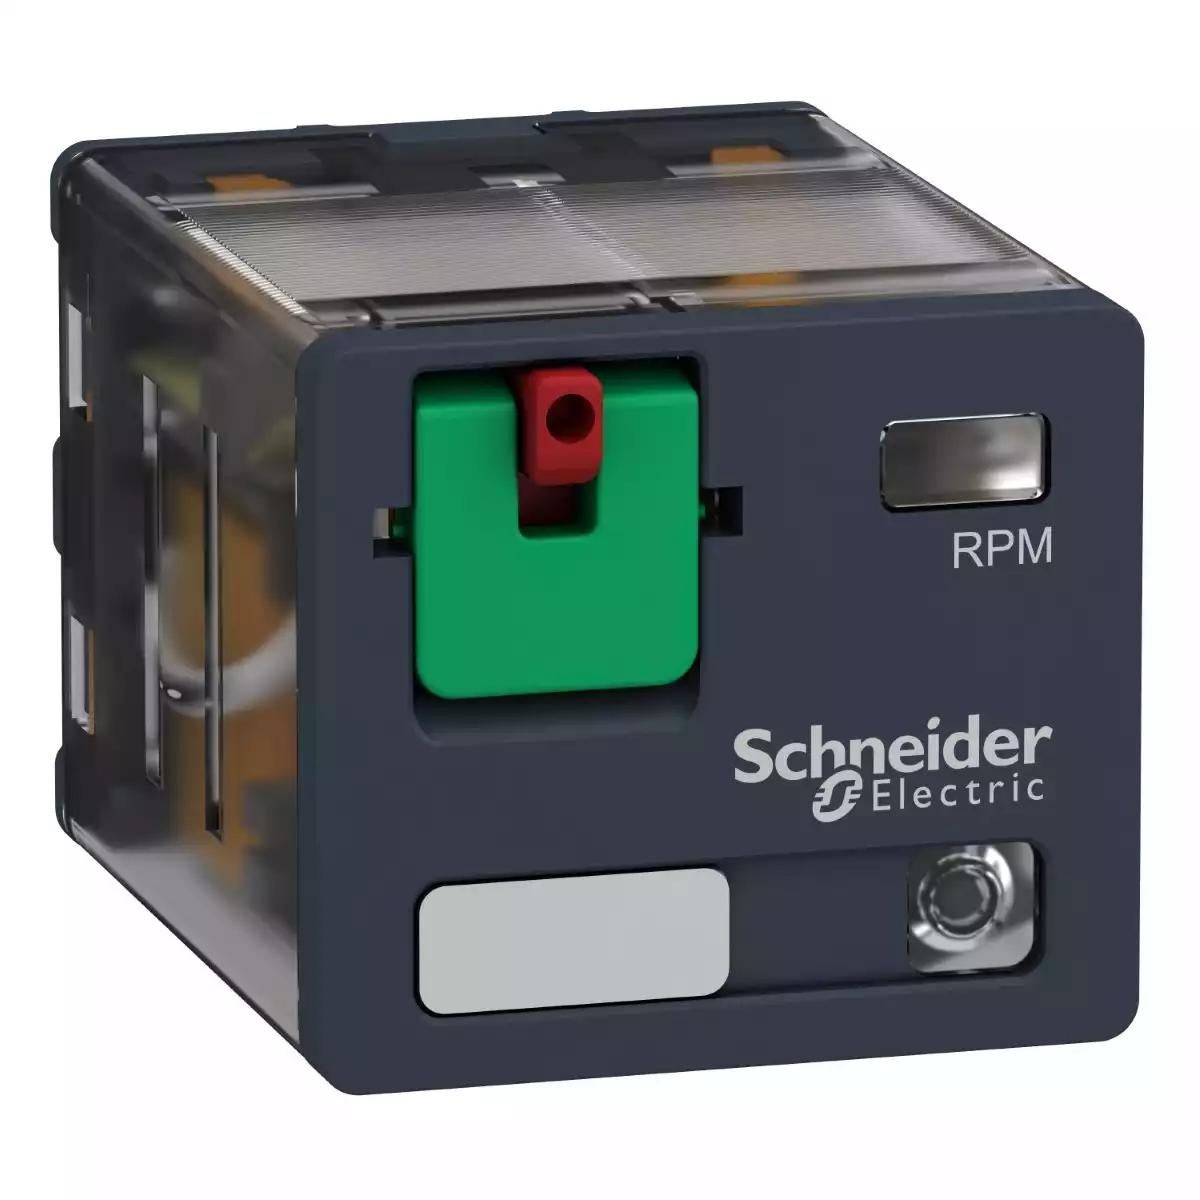 Schneider Electric Zelio RPM - Relay power plug-in relay - 3 C/O - 230 V AC - 15 A - with LED